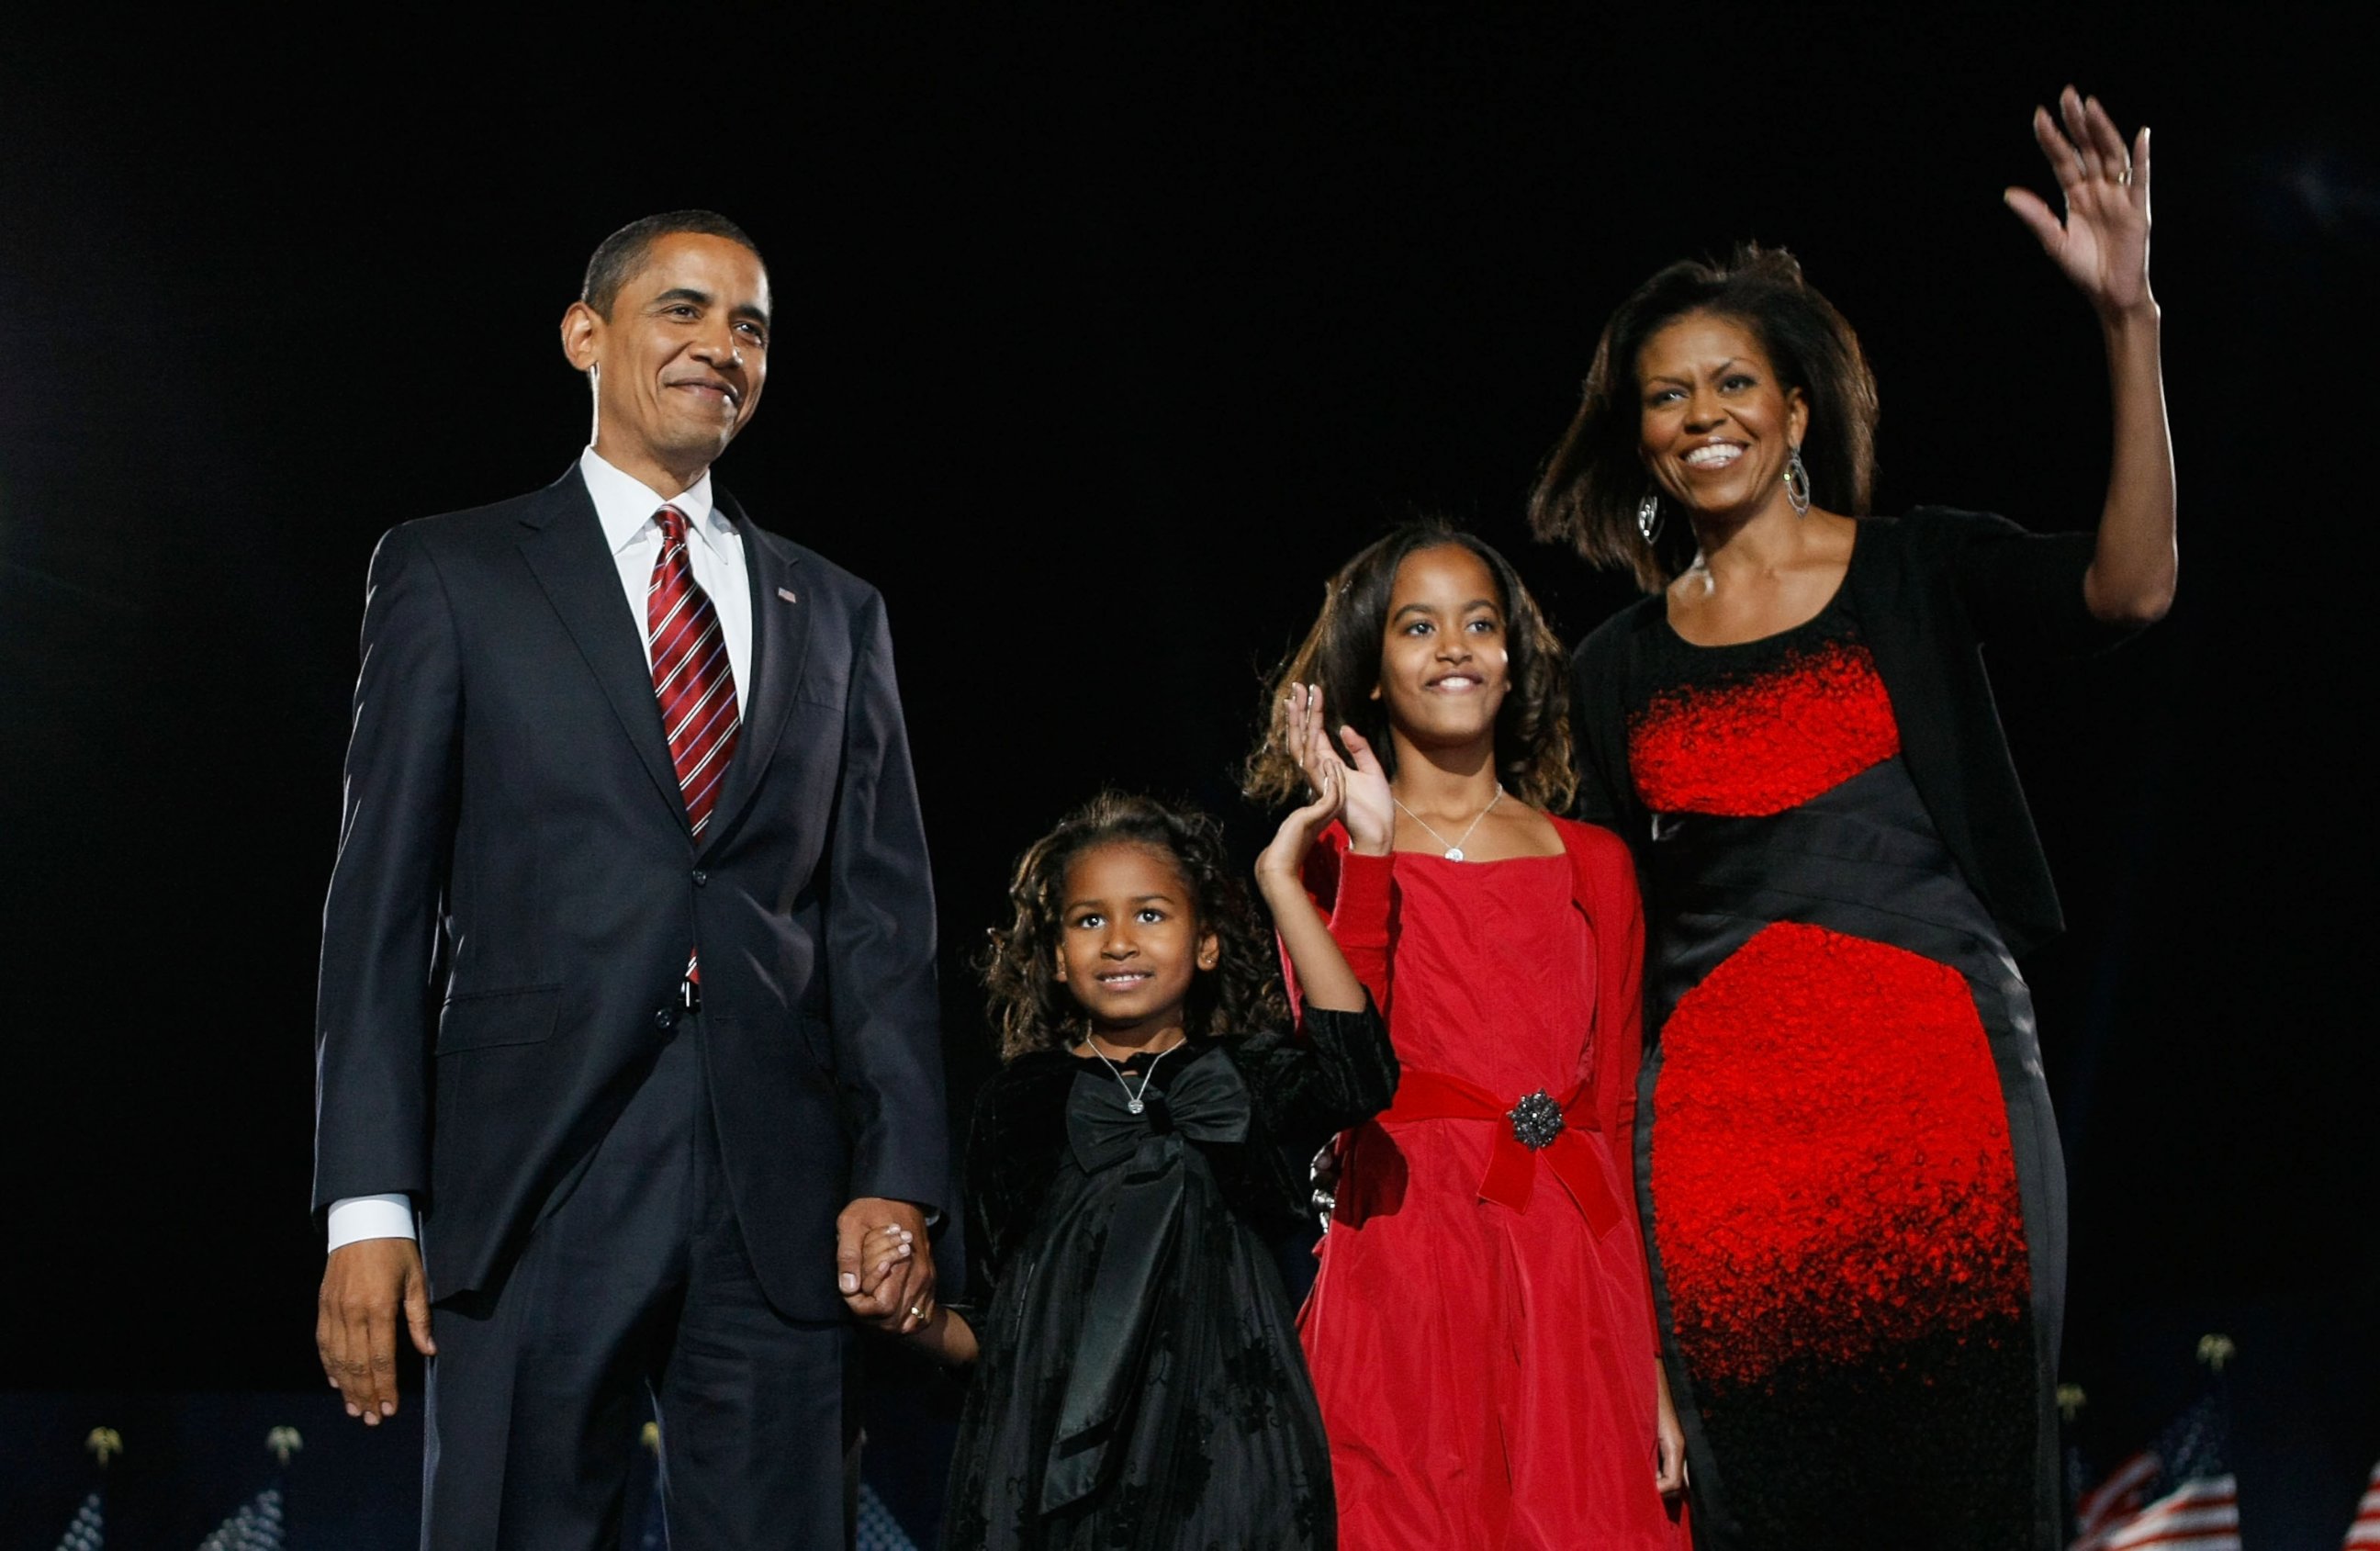 PHOTO: President elect Barack Obama stands on stage along with his wife Michelle and daughters Malia and Sasha during an election night gathering in Grant Park on Nov. 4, 2008 in Chicago.